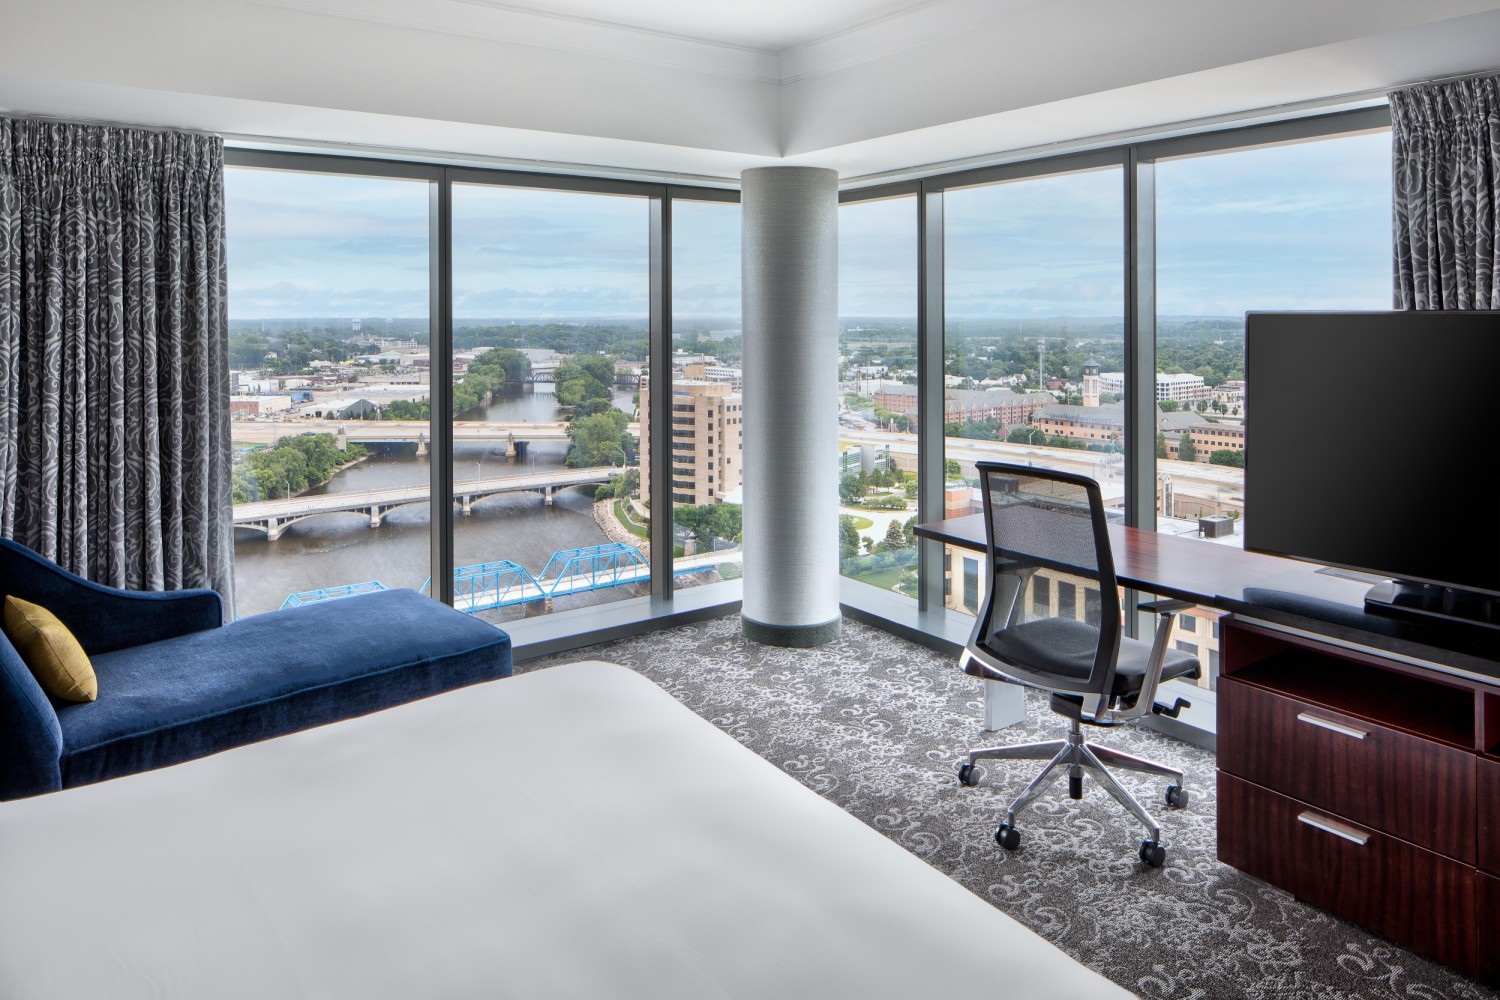 Amway Grand_Tower Luxury Suite_River View_King Bed_Lounge Chair_Desk_Chair_Dresser_TV